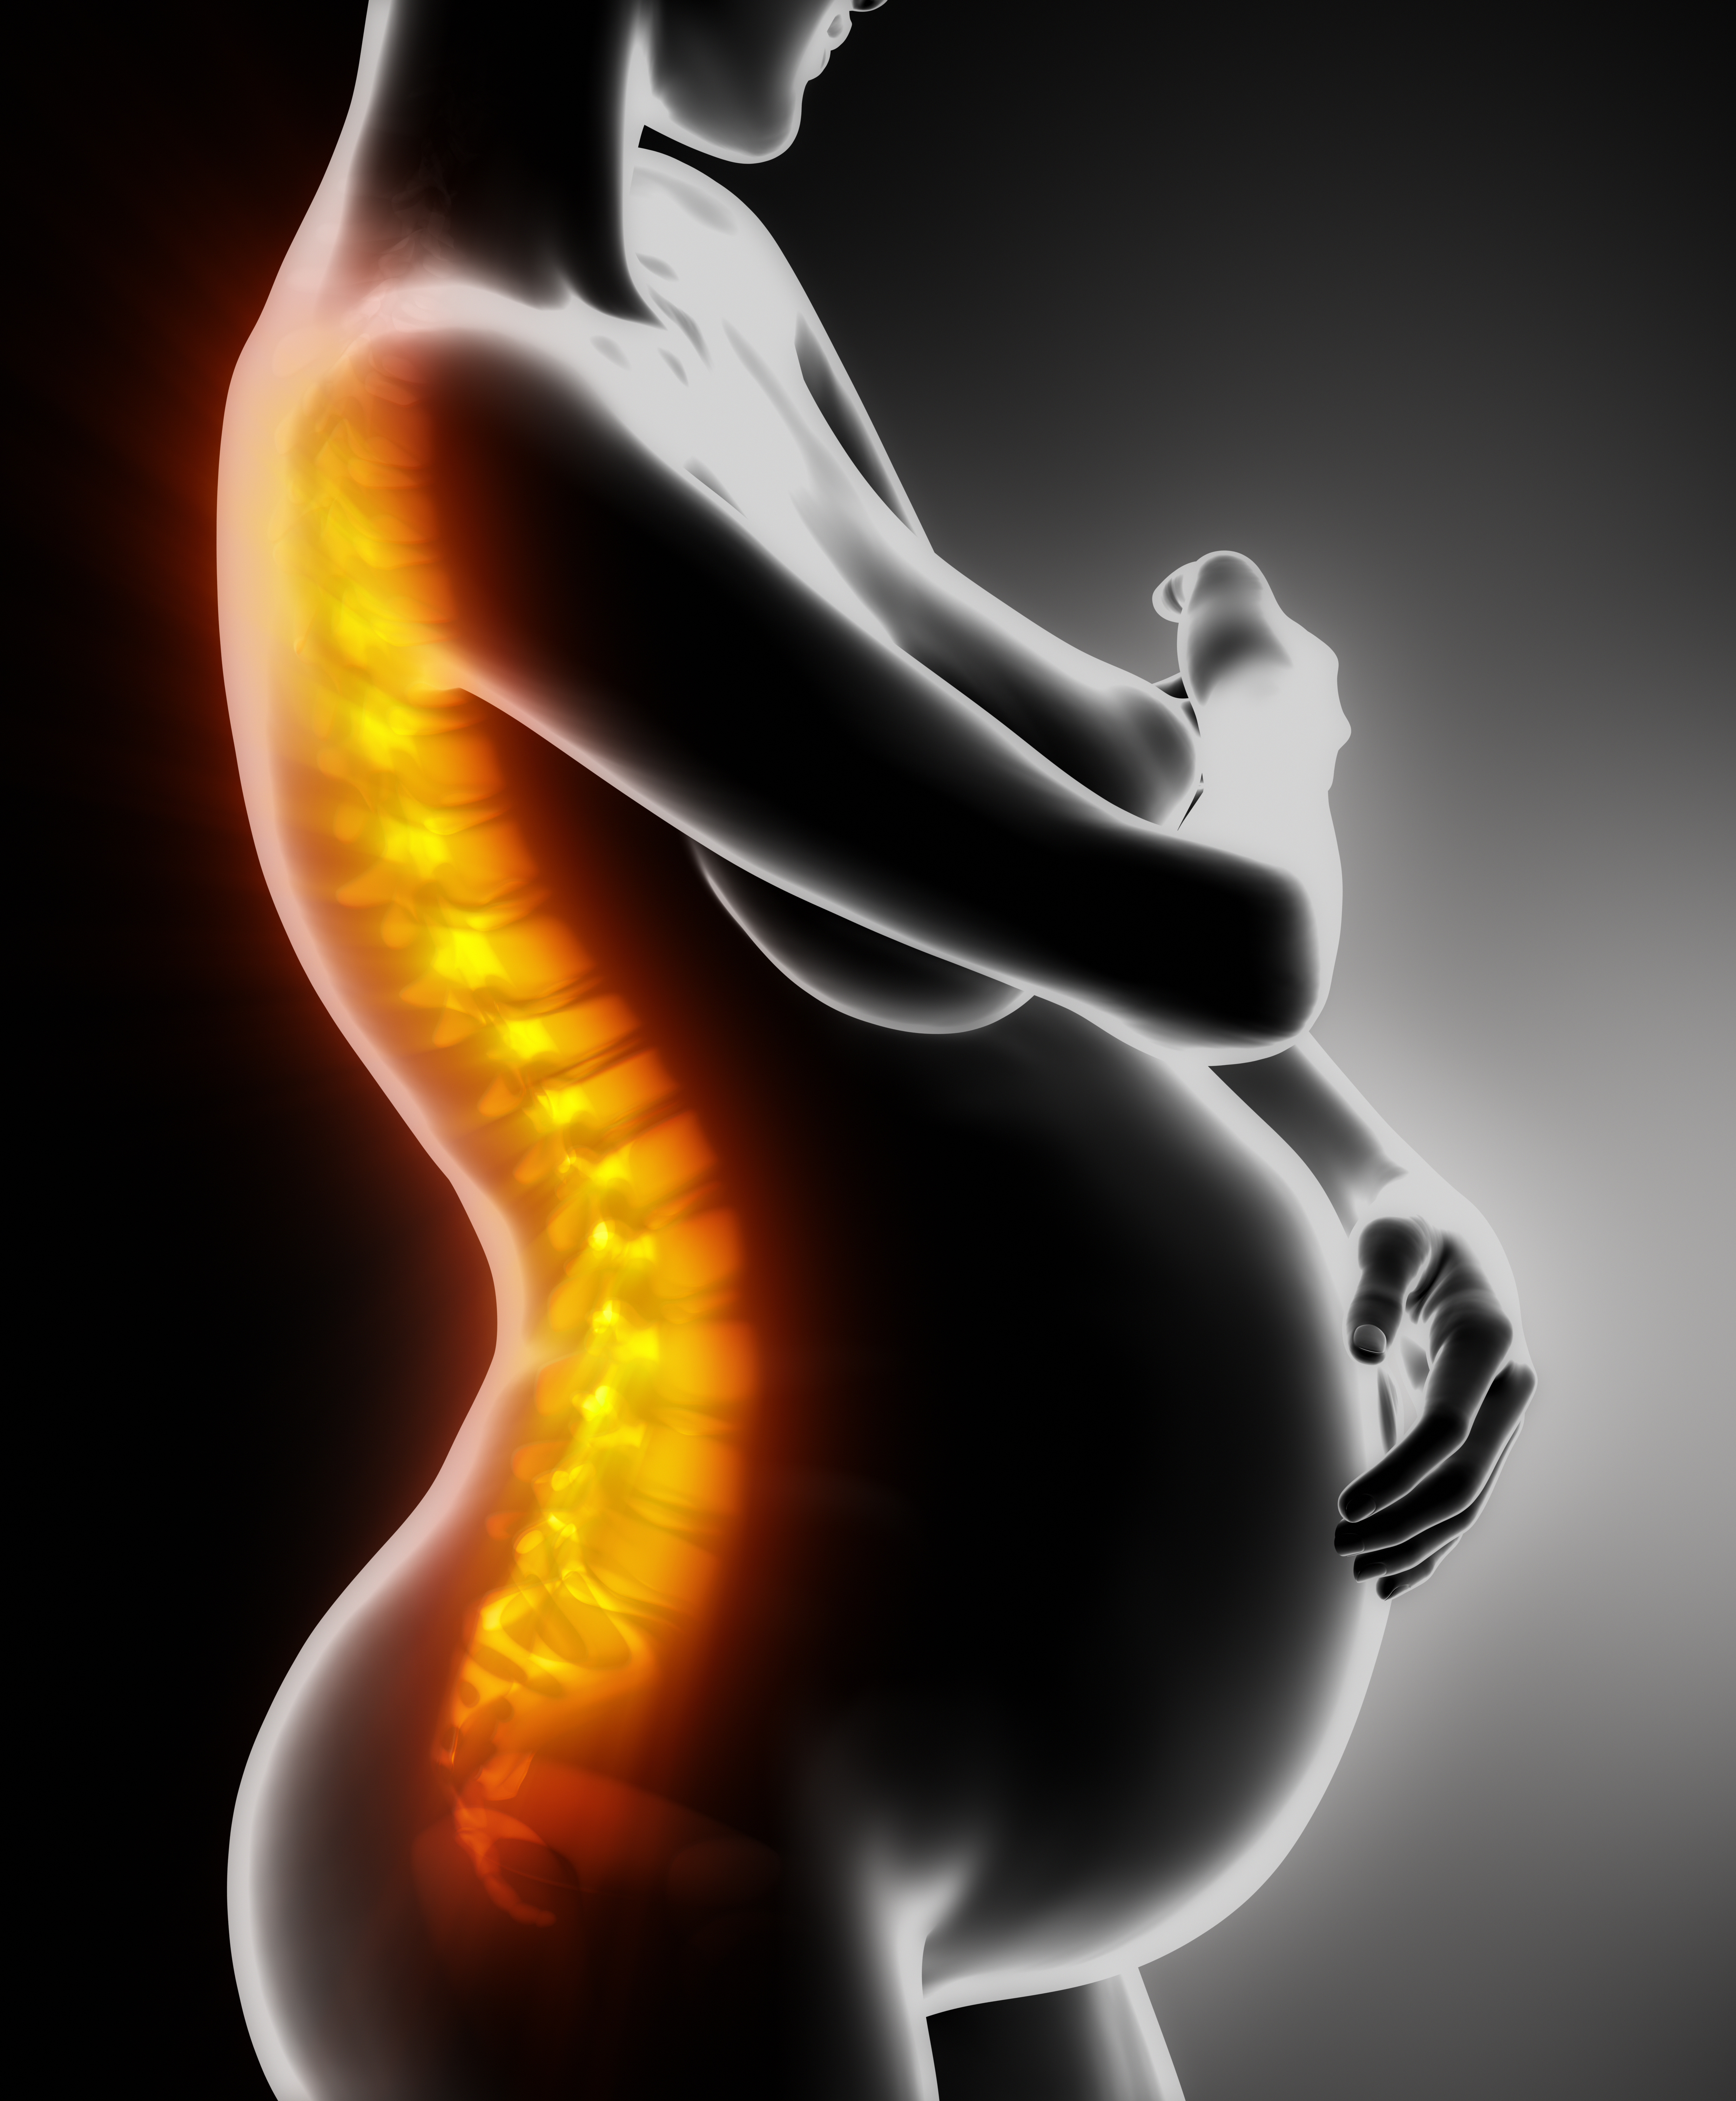 CHIROPRACTIC SPINAL MANIPULATION FOR LOW BACK PAIN OF PREGNANCY: A